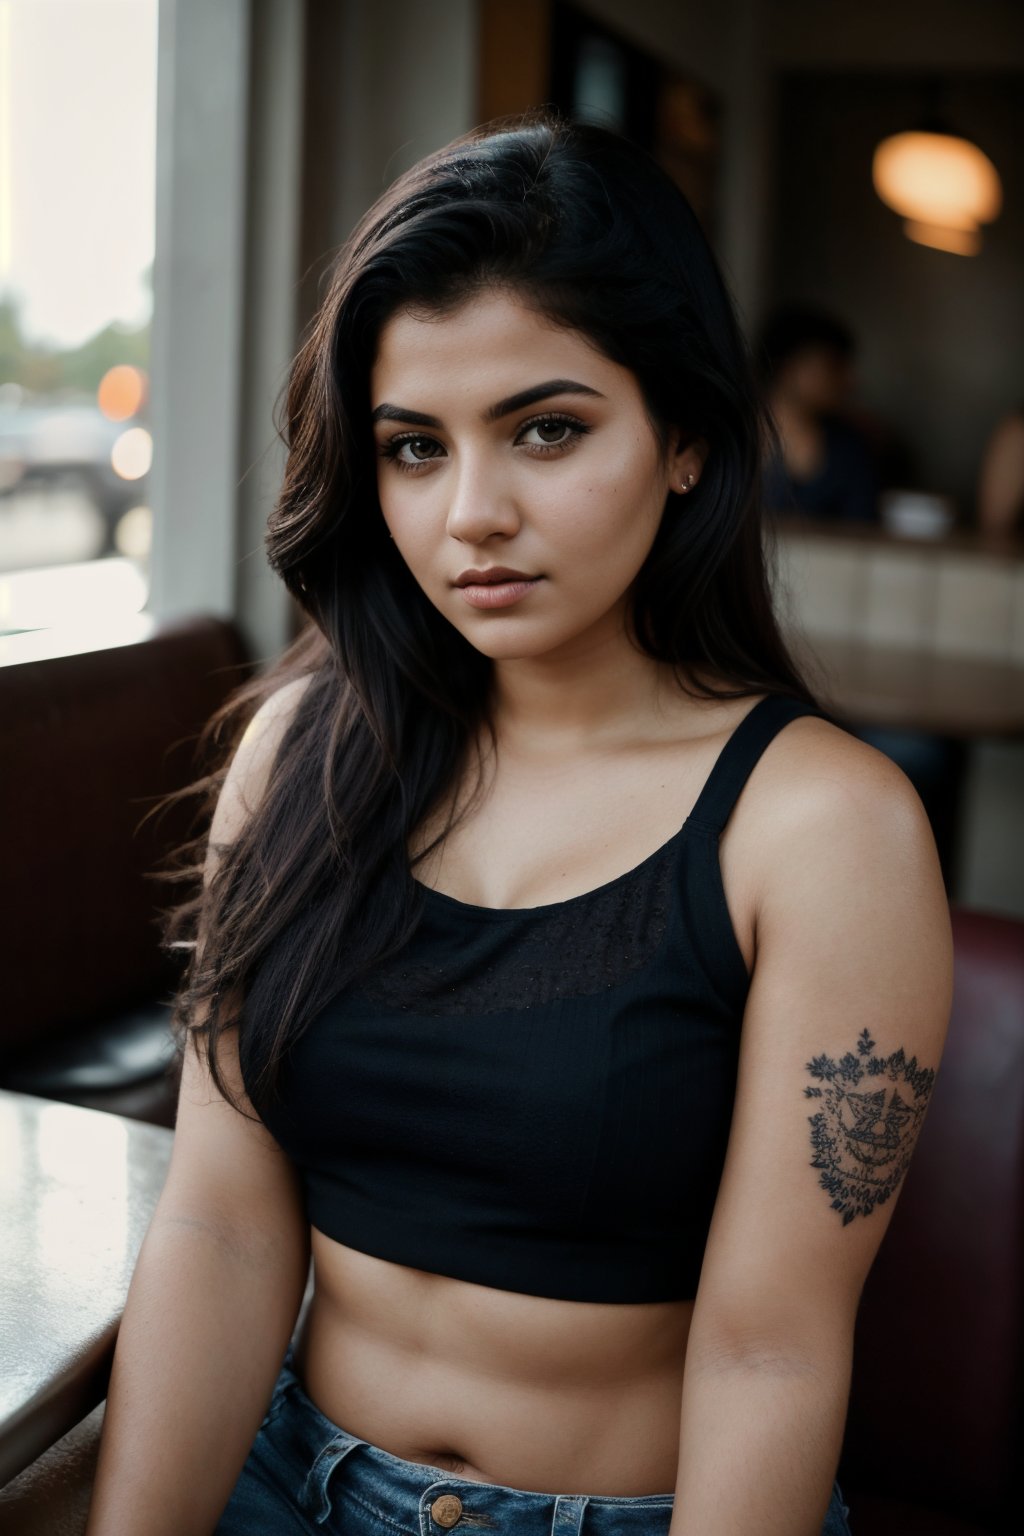 moody ethereal photography photo of a young angry (isidora_v2:0.95), croptop, textured skin, goosebumps, tattoos on her arms, sitting in a 50s diner, perfect eyes, (atmospheric lighting), bokeh, sharp focus on subject,kerala road,Plump